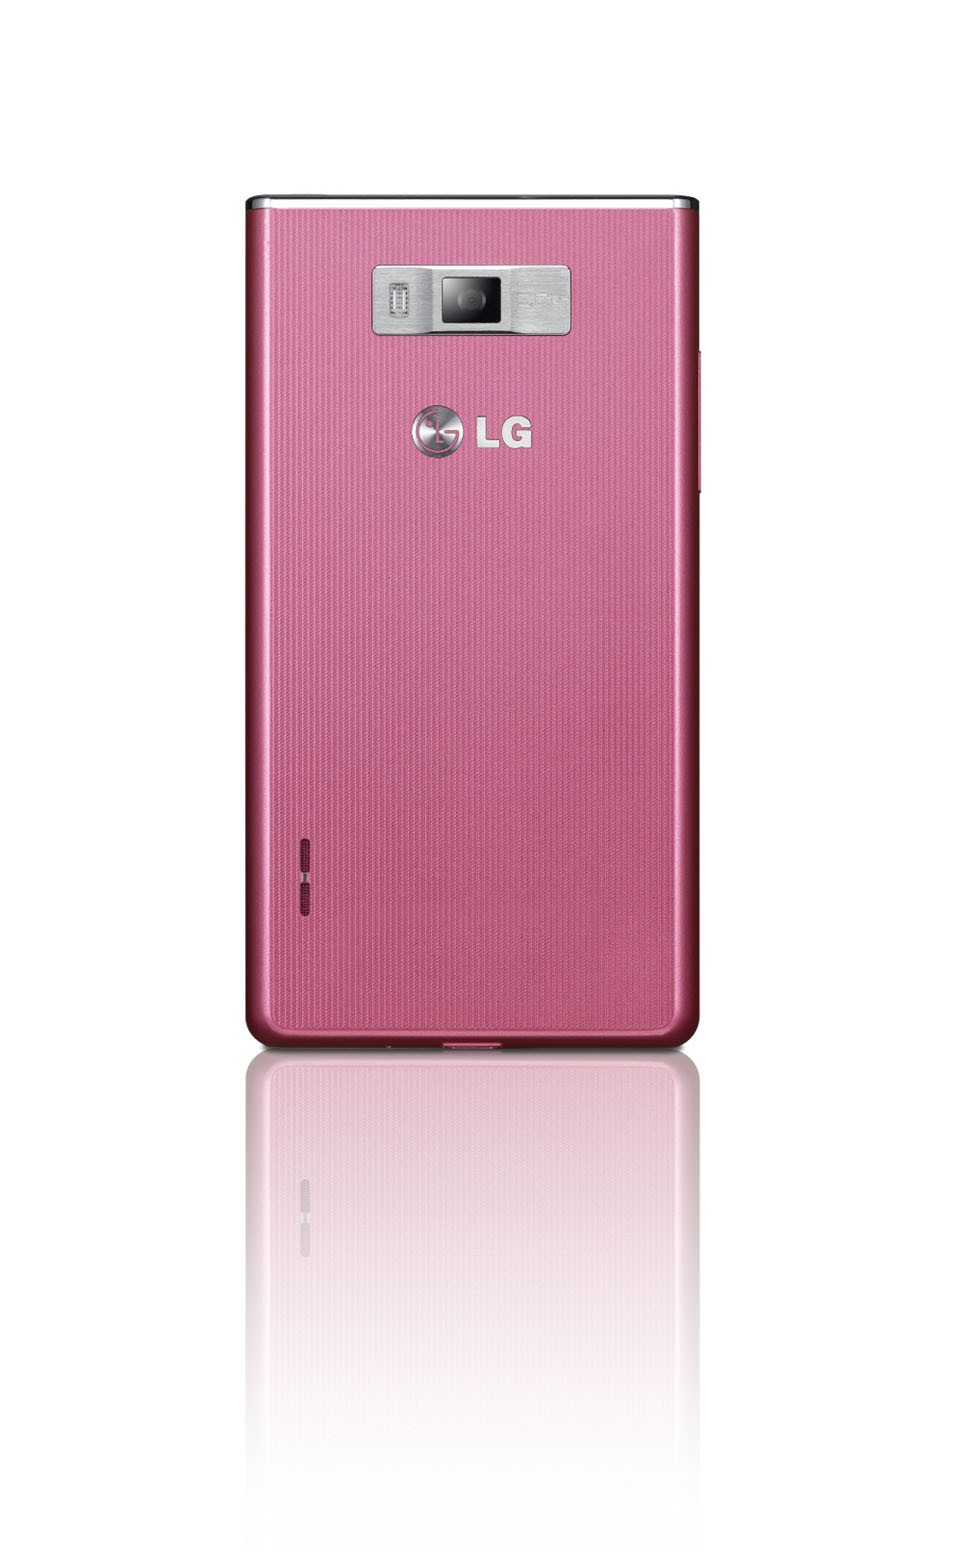 Rear view of the LG Optimus L7 smartphone in pink